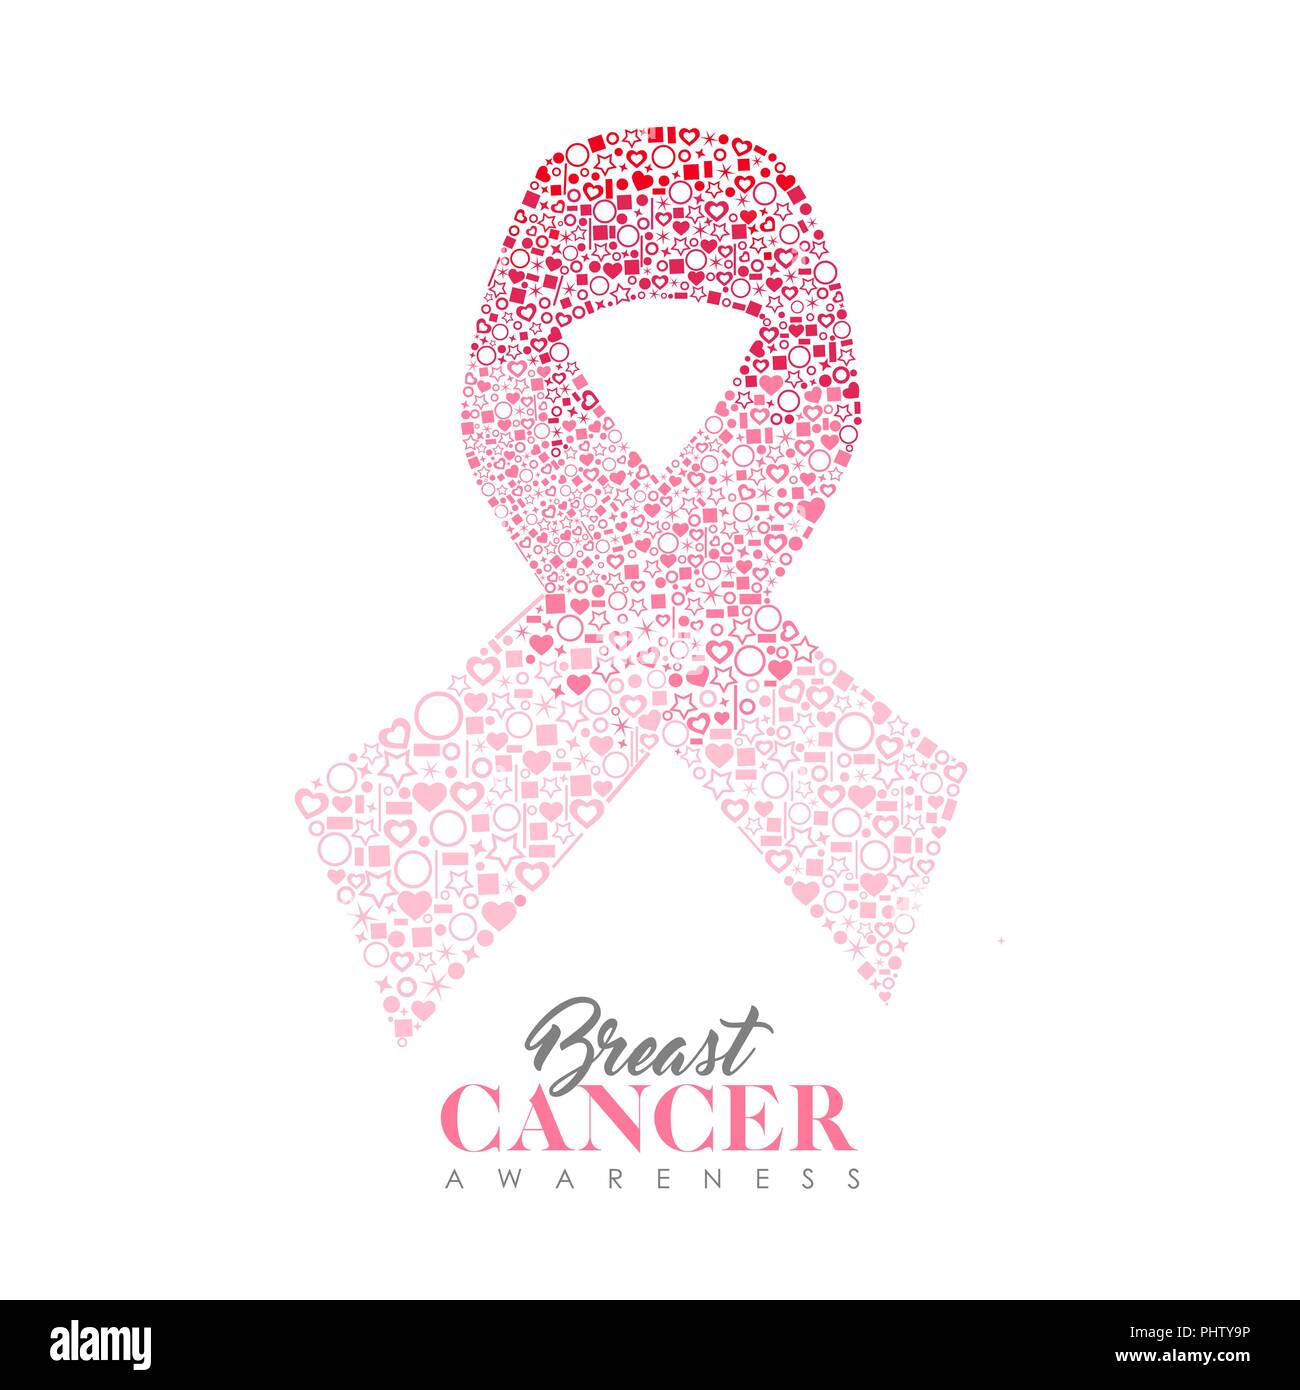 Pink ribbon for breast cancer awareness - Your Health